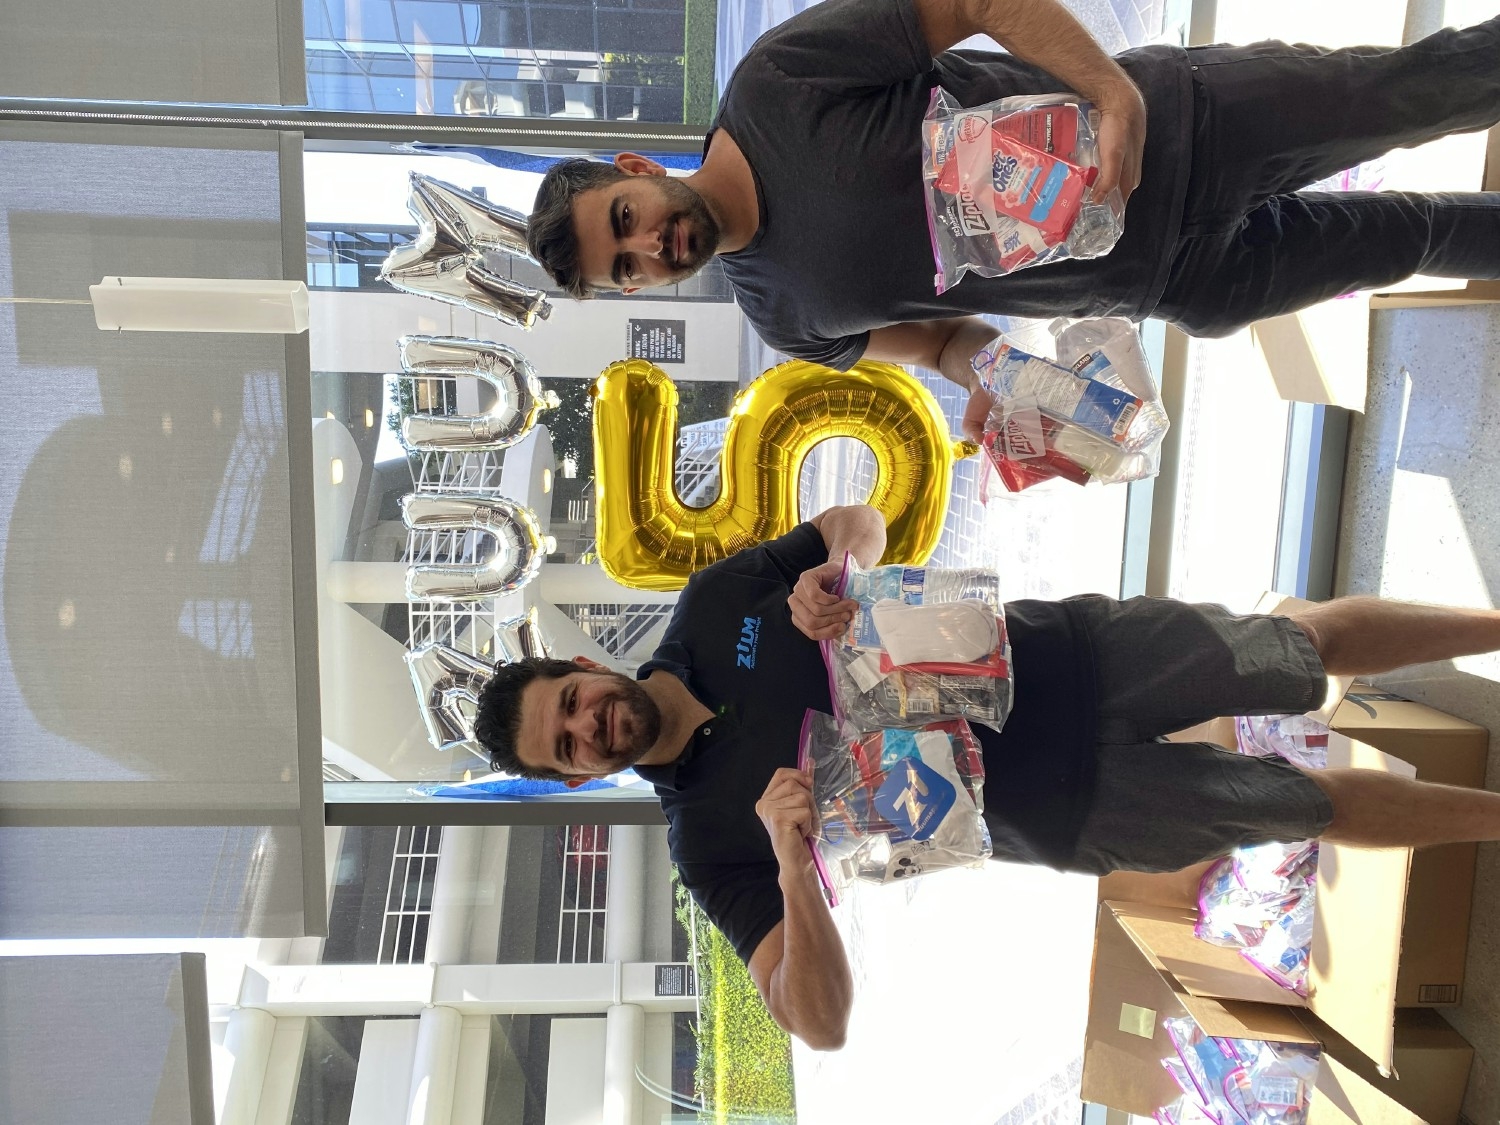 For ZUUM's 5th anniversary, we partnered with a So-Cal based charity to assemble and donate hygiene kits.